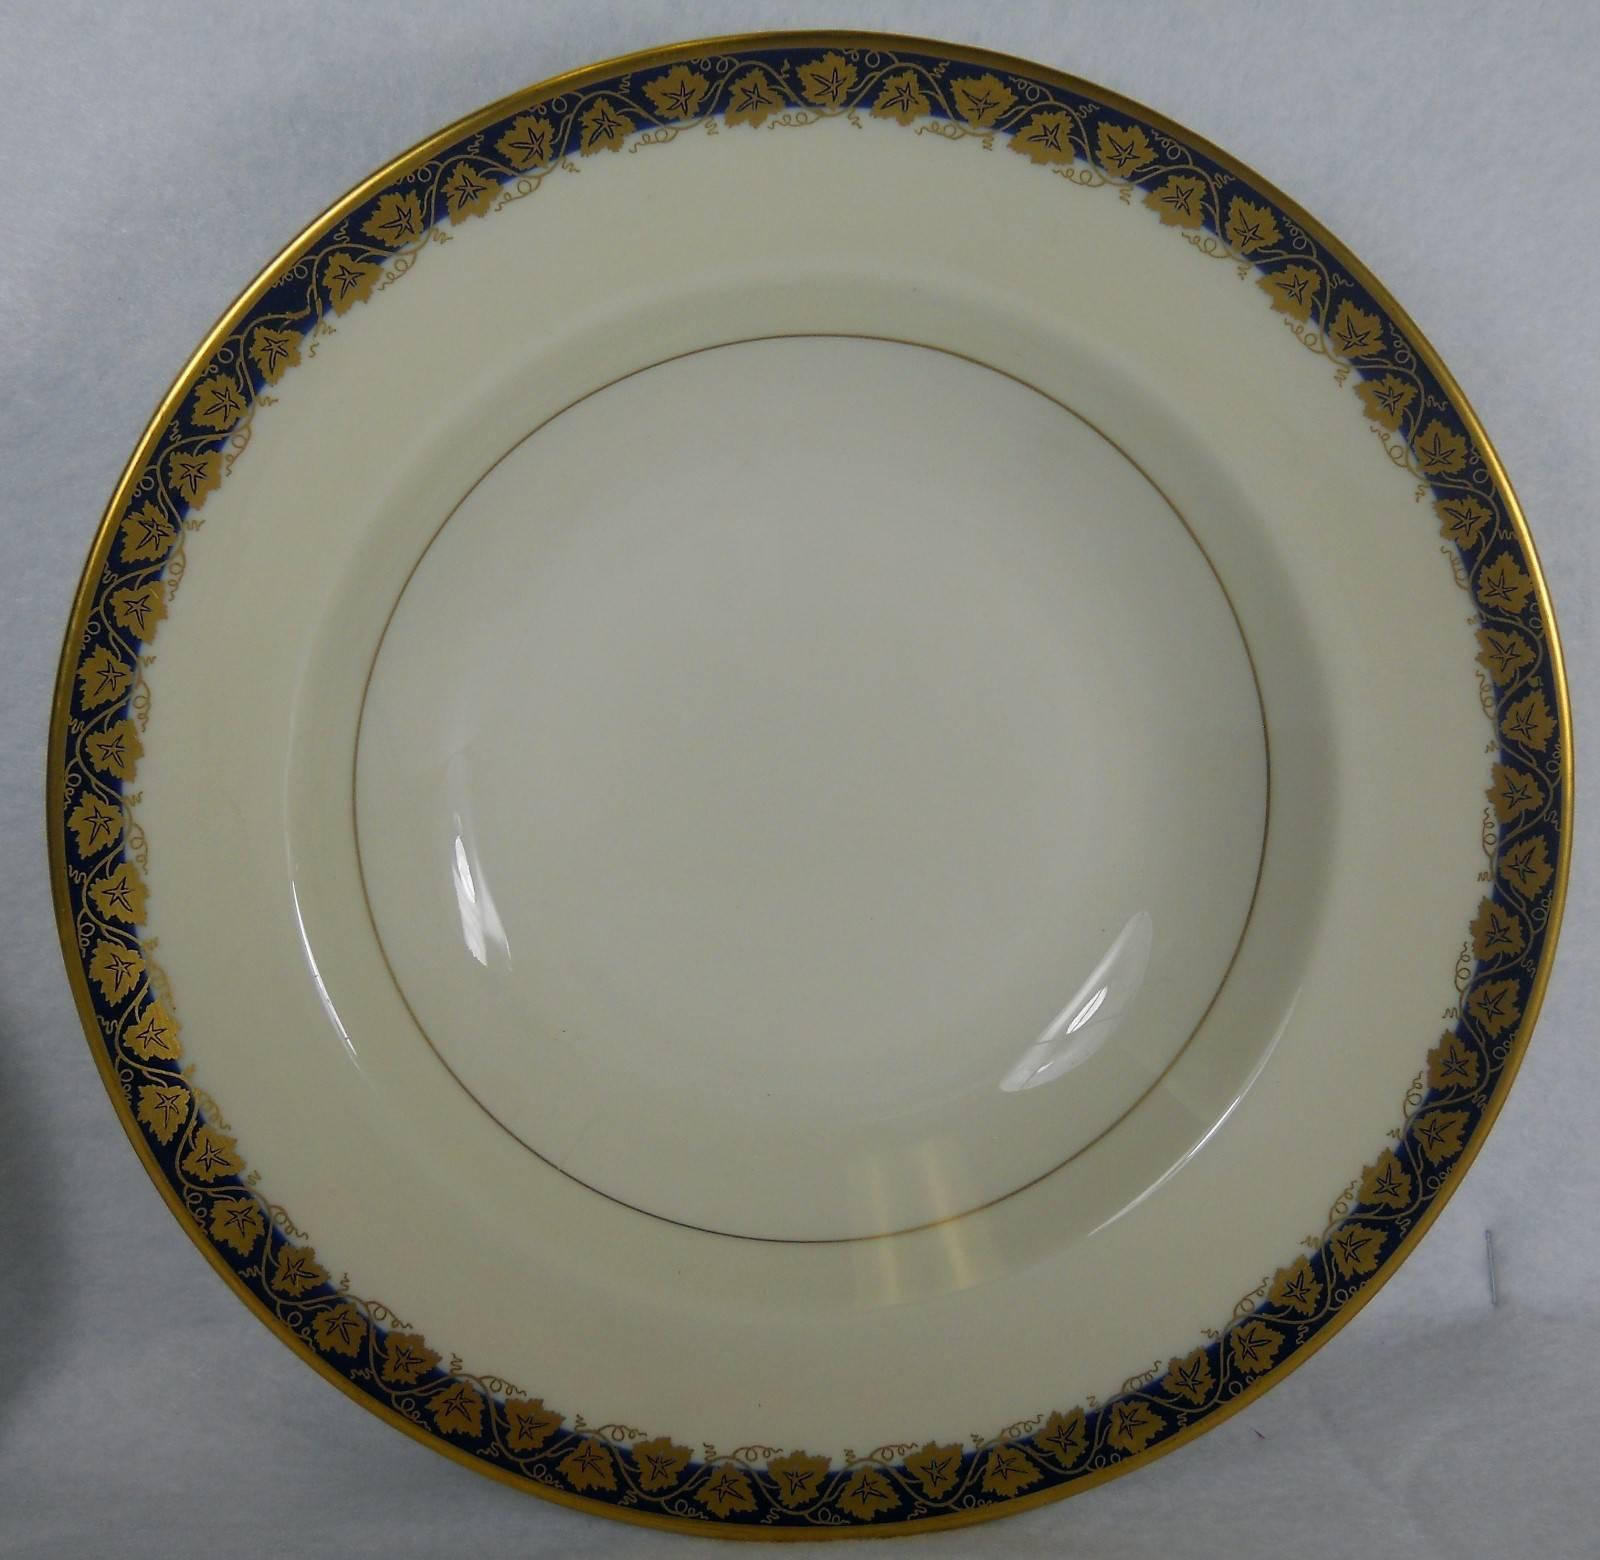 CHINA FINDERS 

China, Crystal, Flatware and Collectible Matching Service is offering ONE (1) 

HAVILAND china NEW York OAKMONT COBALT BLUE pattern Set of Twelve (12) Rim Soup or Salad Bowl

in great condition free from chips, cracks, break,